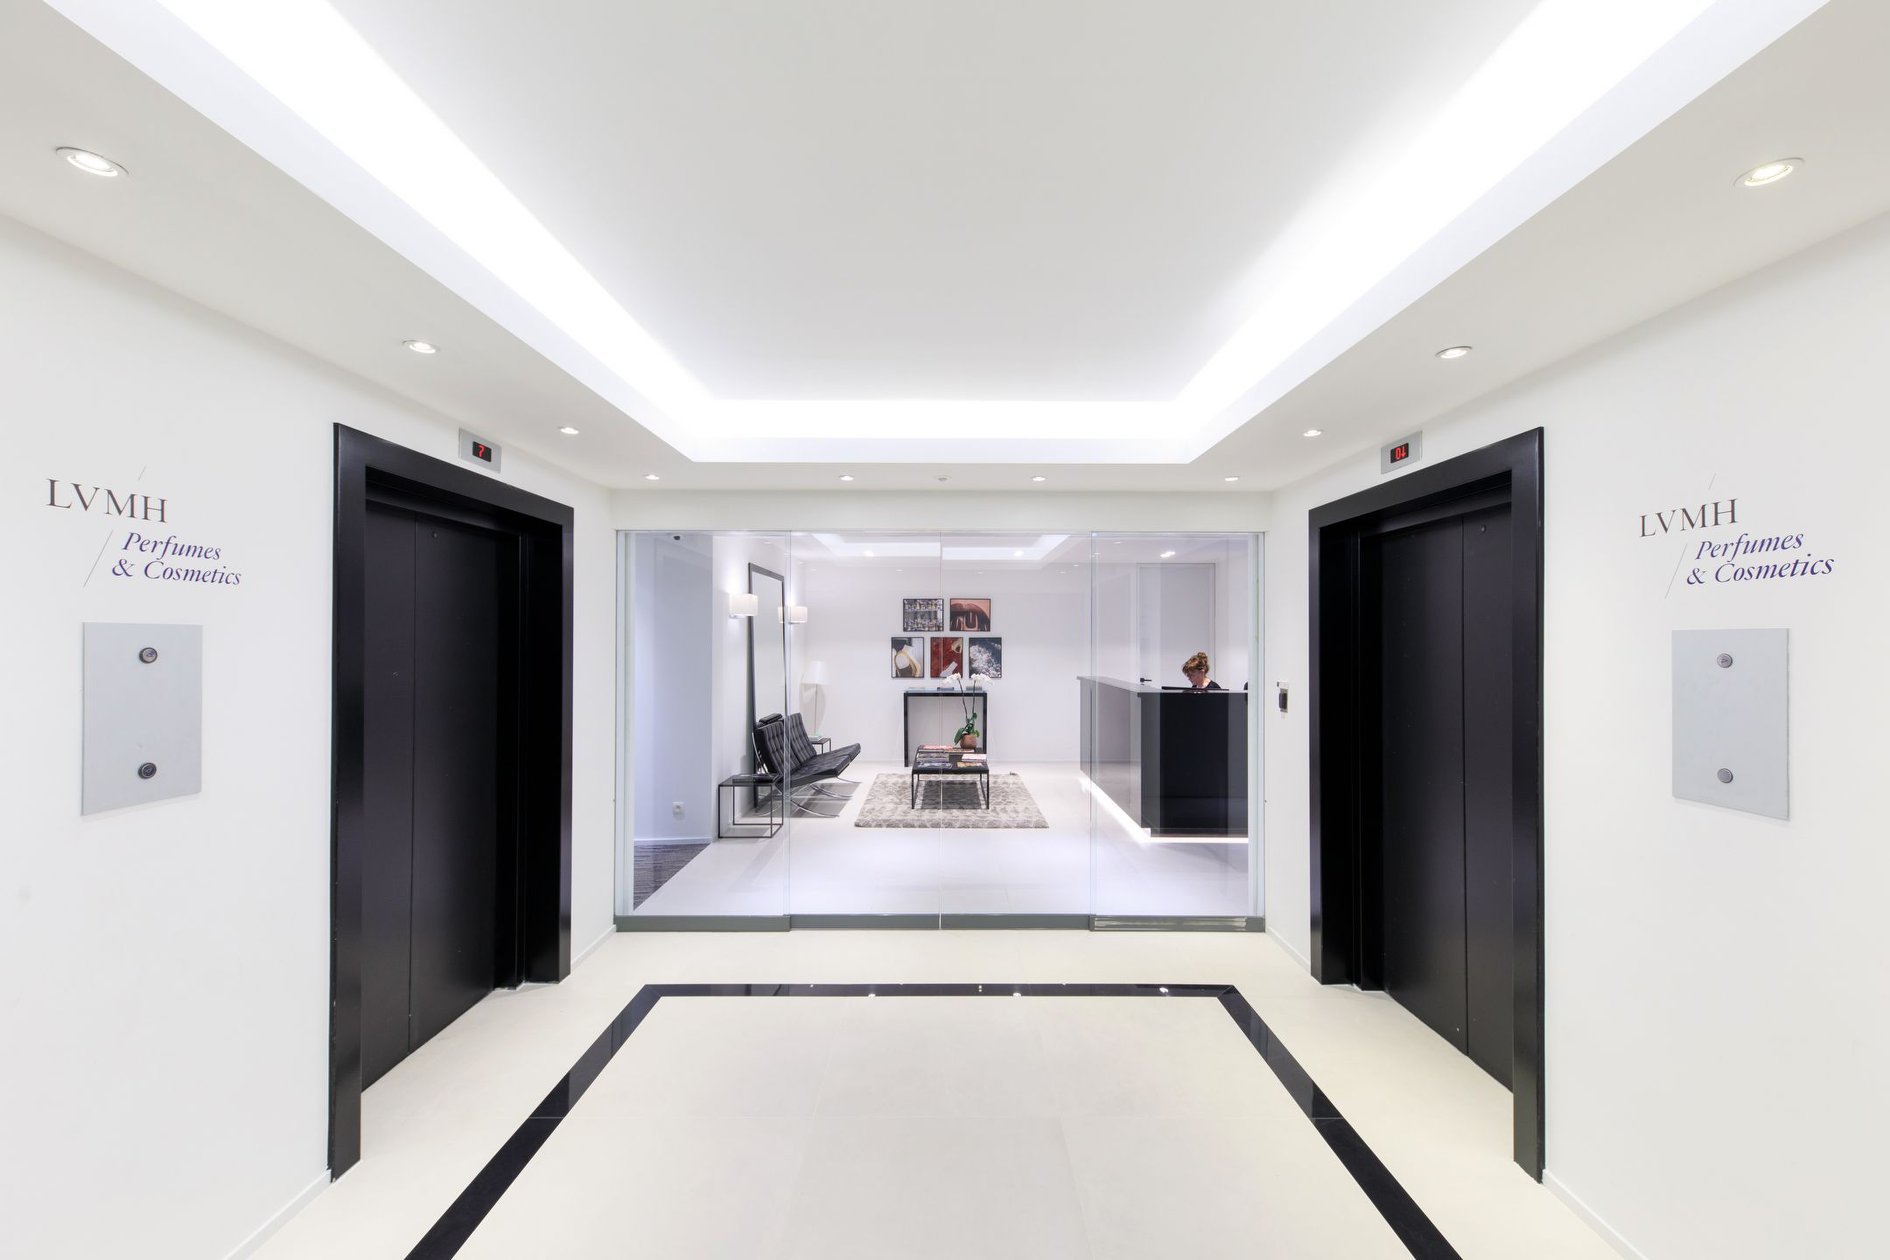 LVMH Perfumes & Cosmetics offices Brussel